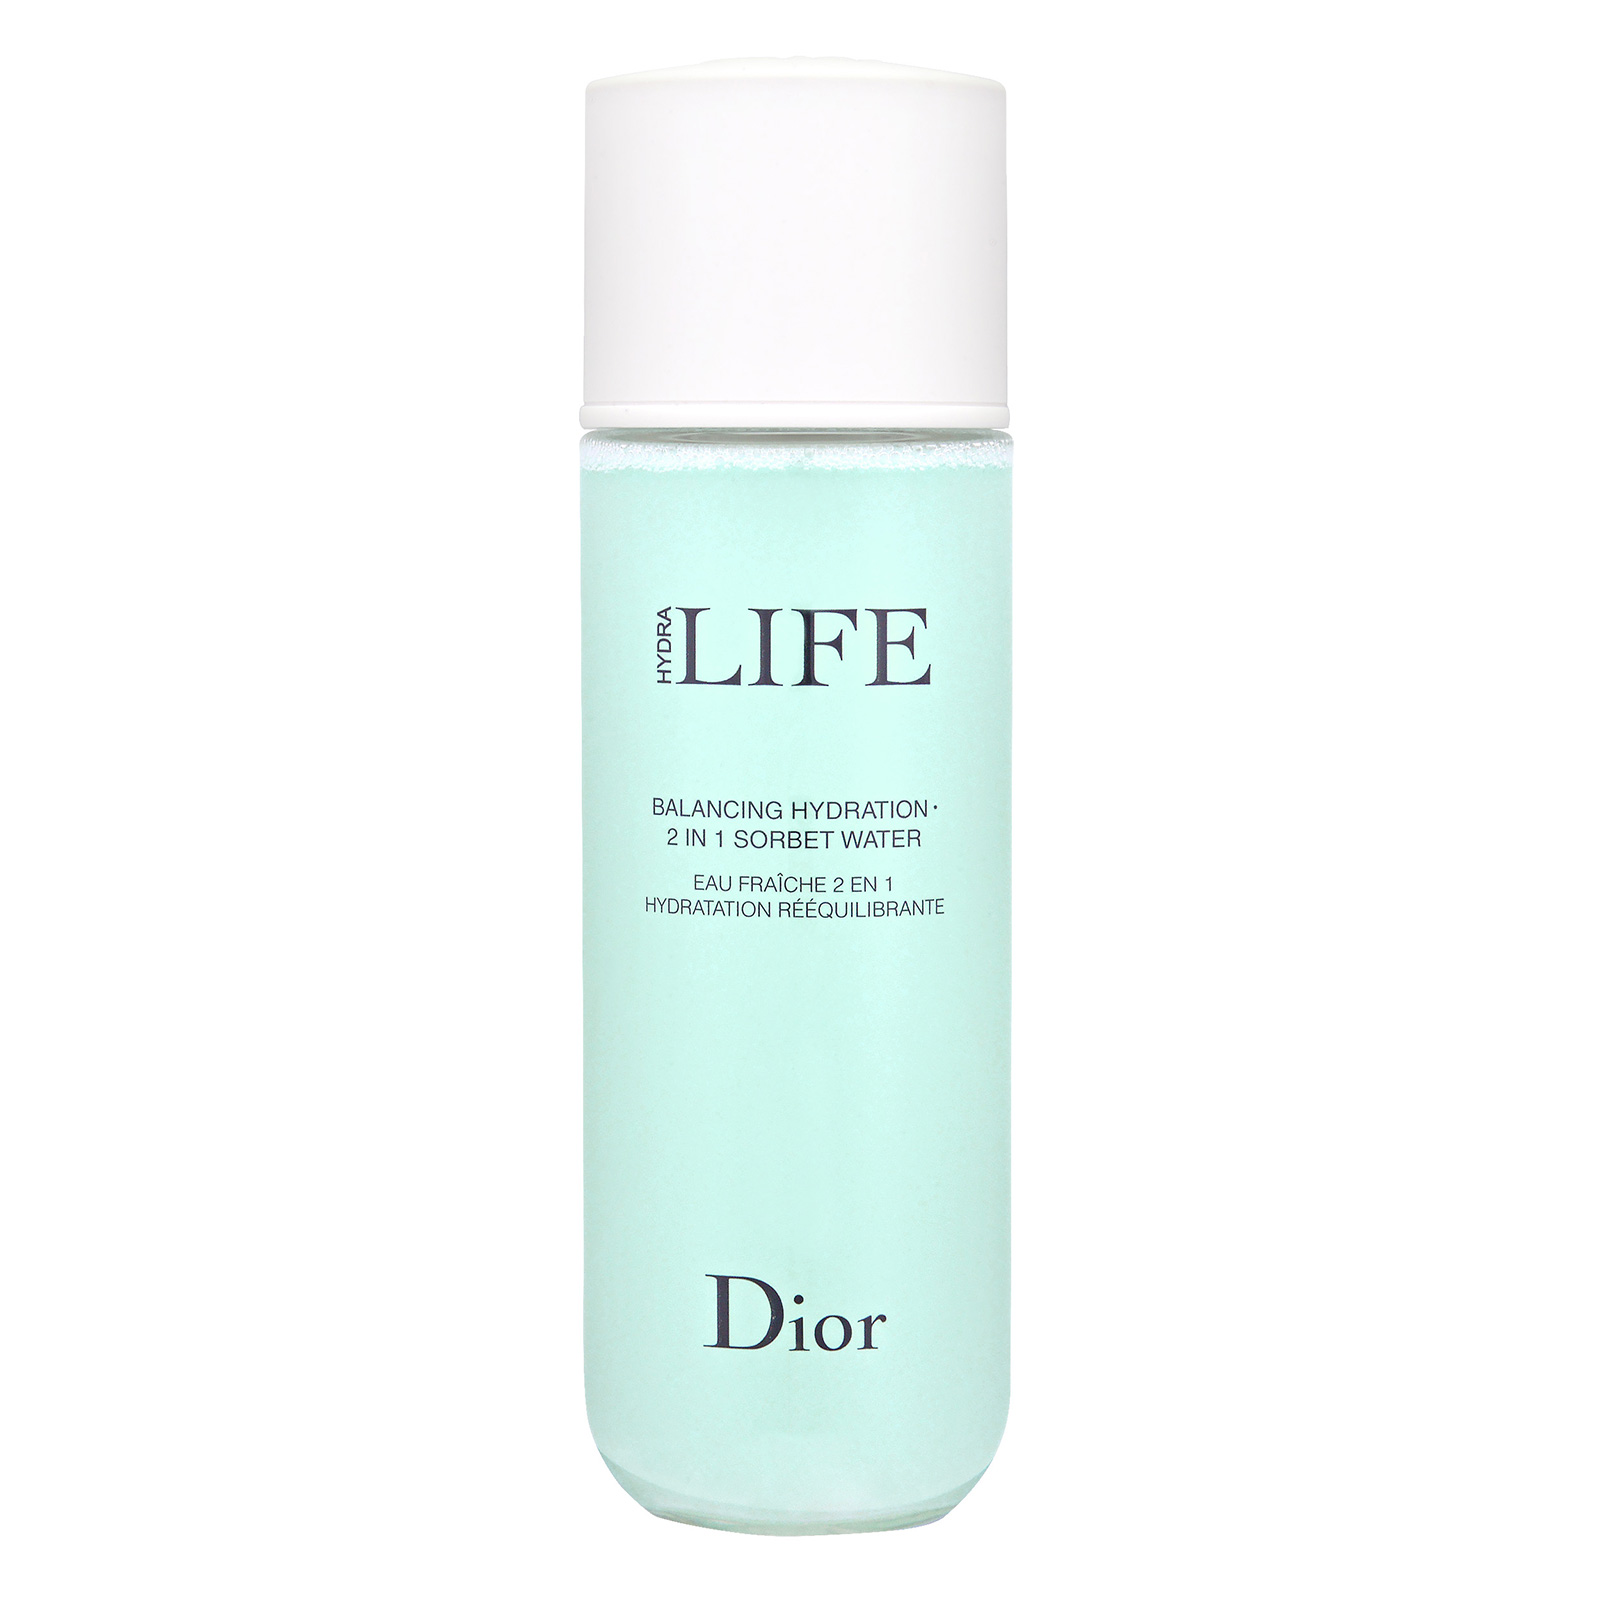 Hydra Life Balancing Hydration 2 In 1 Sorbet Water